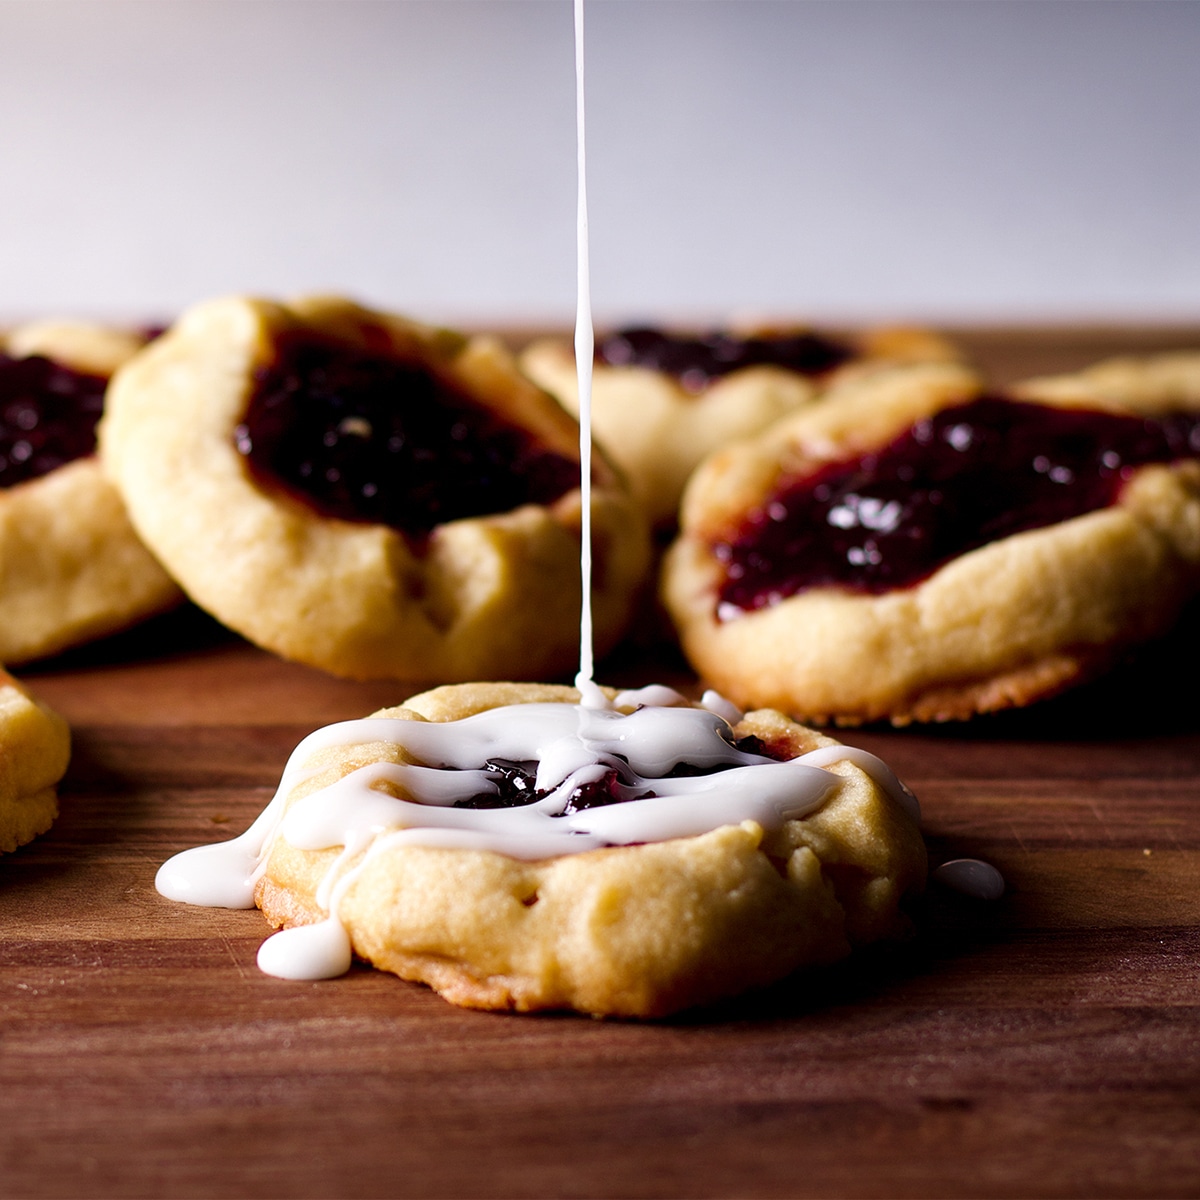 Drizzling vanilla glaze over almond thumbprint cookies filled with cherry preserves.